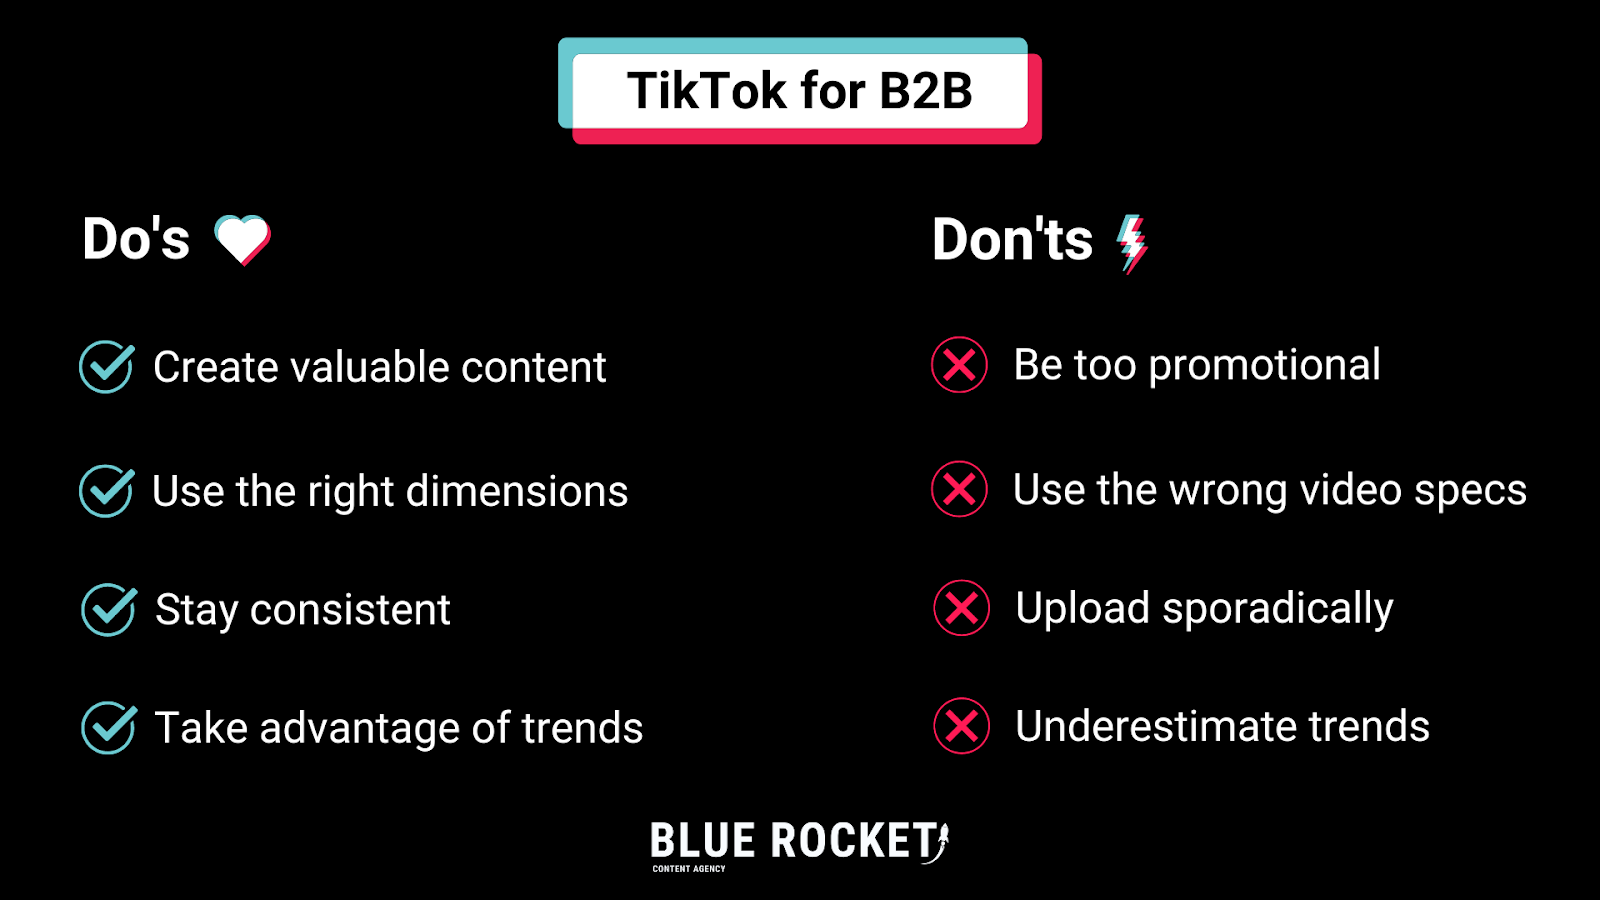 TikTok for B2B Do's and Dont's